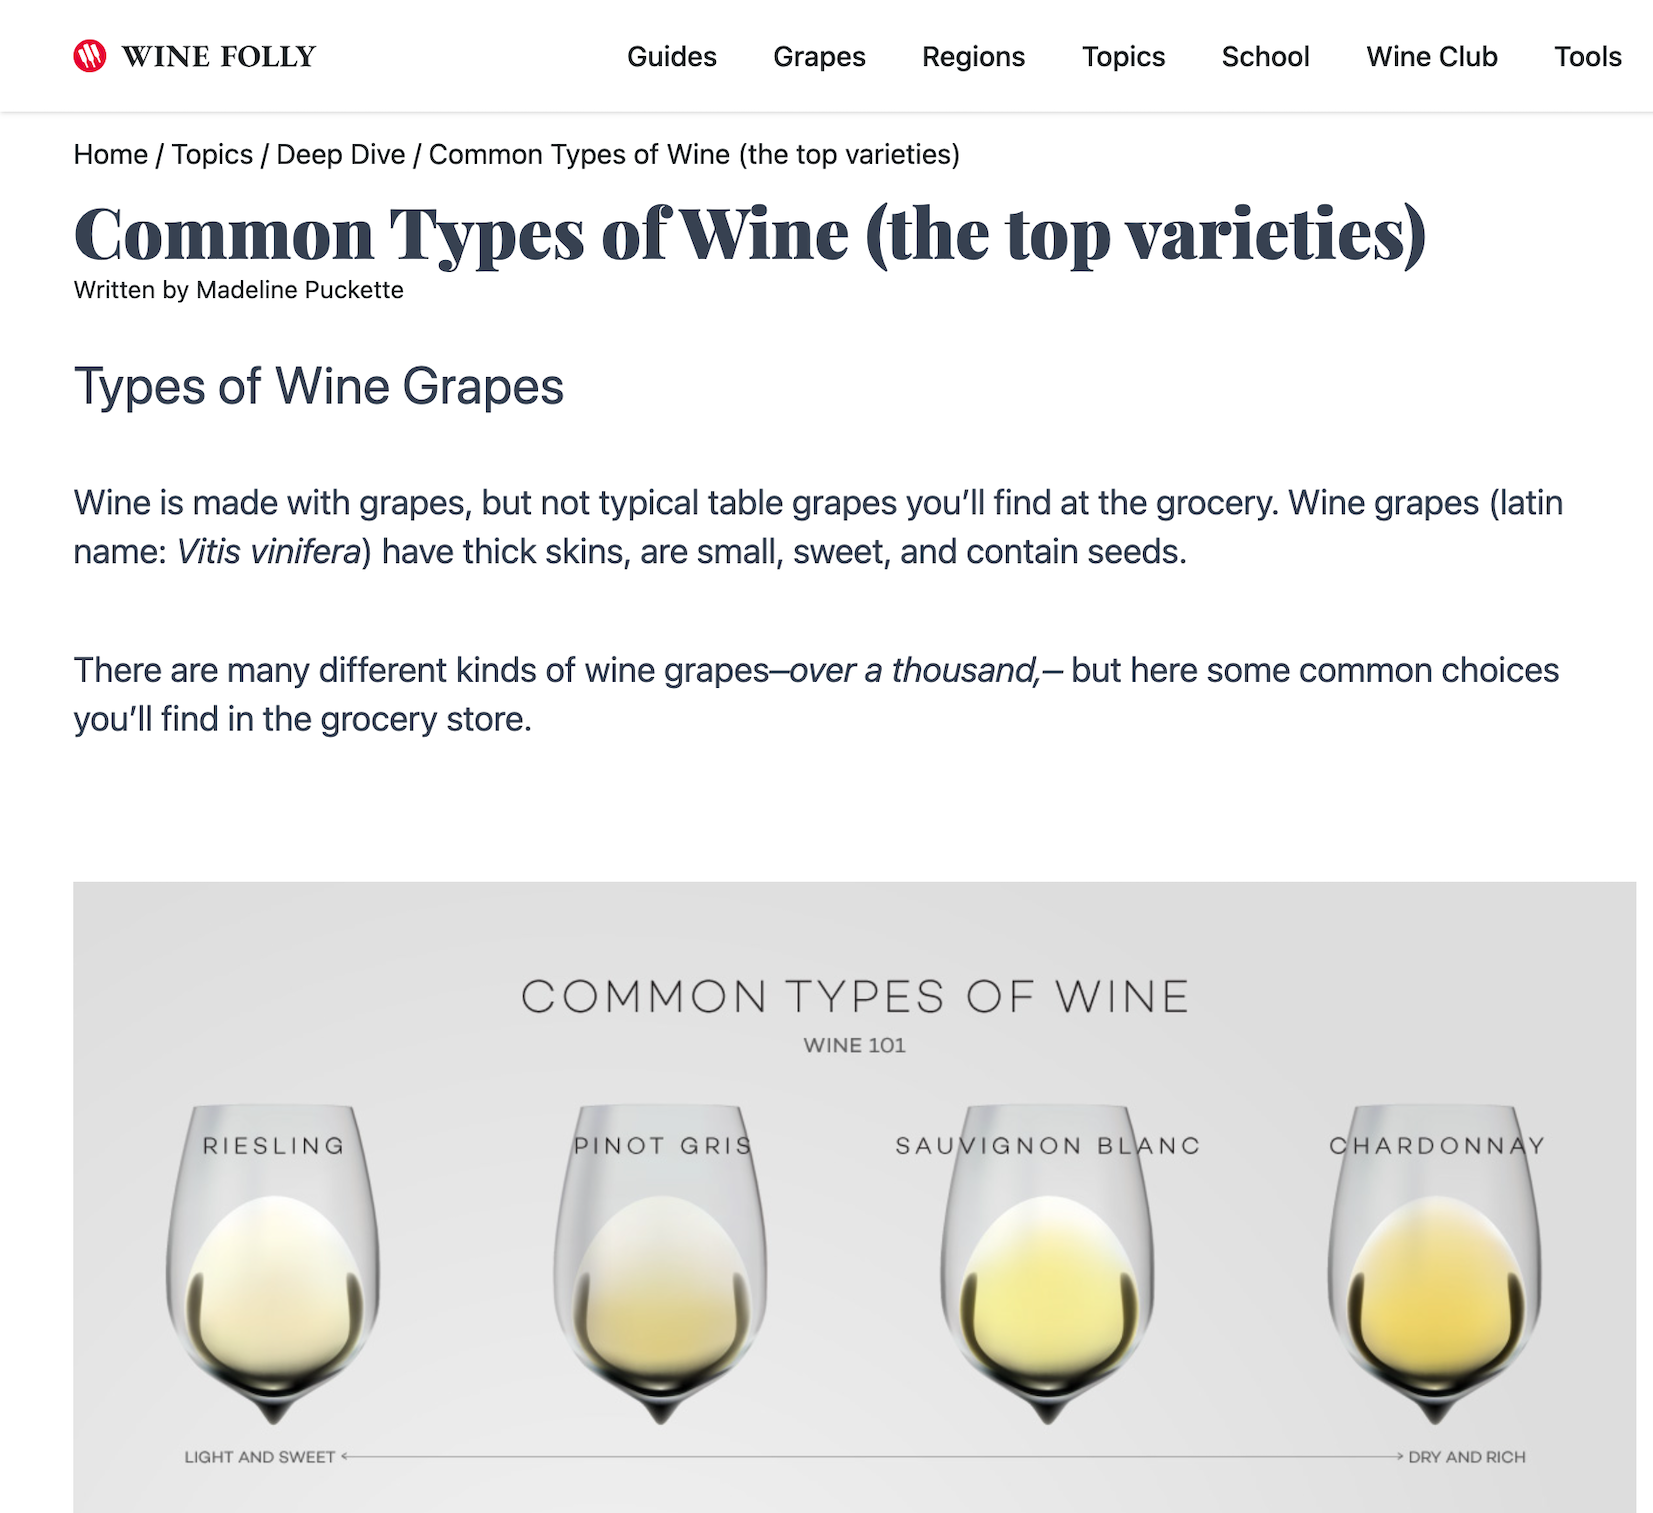 Wine Folly's page explaining the different types of wine.